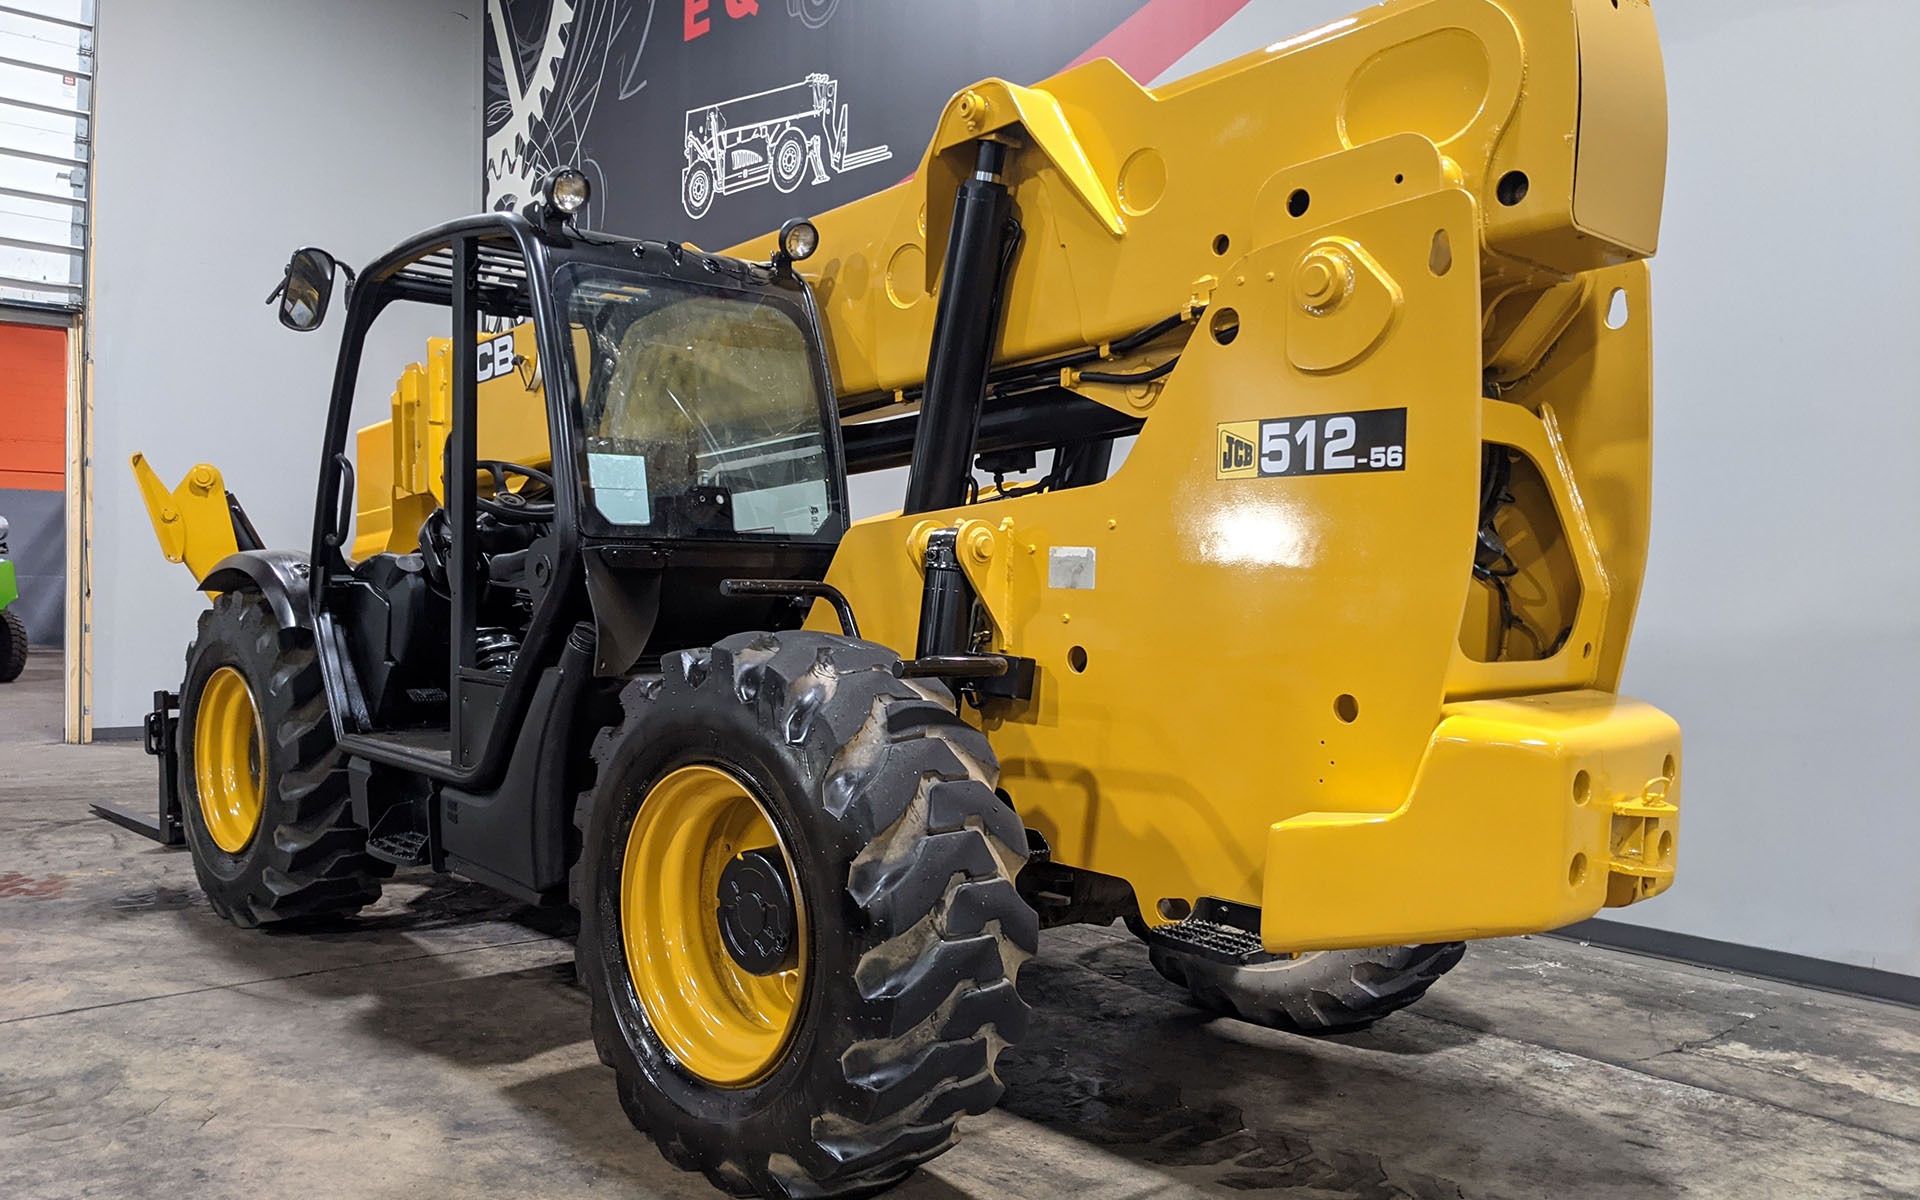 Used 2013 JCB 512-56  | Cary, IL